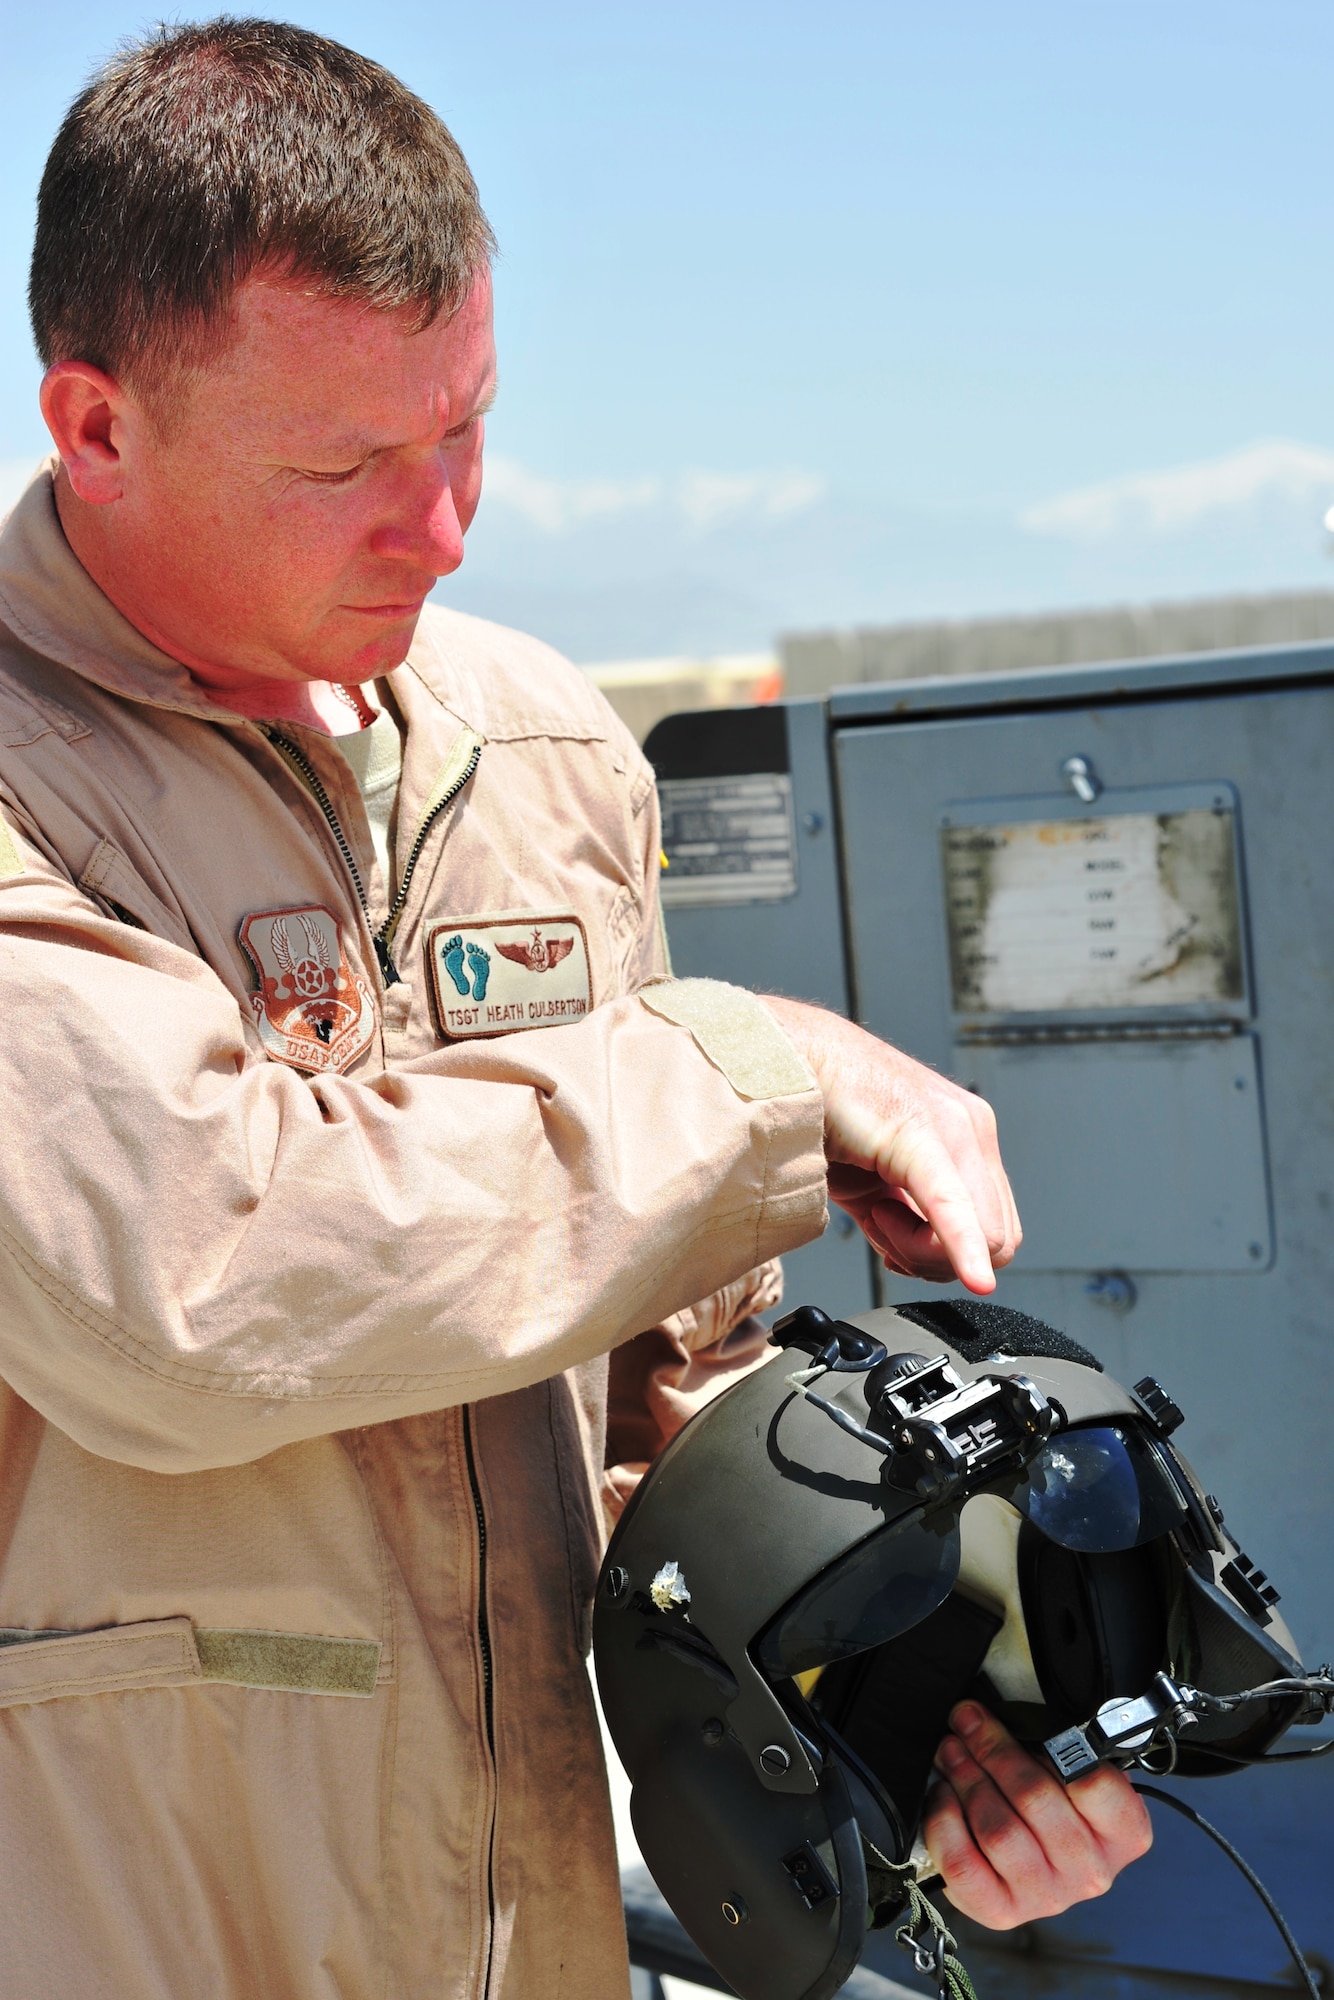 Tech. Sgt. Heath Culbertson, 83rd Expeditionary Rescue Squadron flight engineer, shows where a bullet entered then exited his helmet.  Sergeant Davis was uninjured when he was shot in the helmet during a mission to recover the pilots of a downed Army helicopter, April 23, 2011.  (U.S. Air Force photo by Capt. Erick Saks)